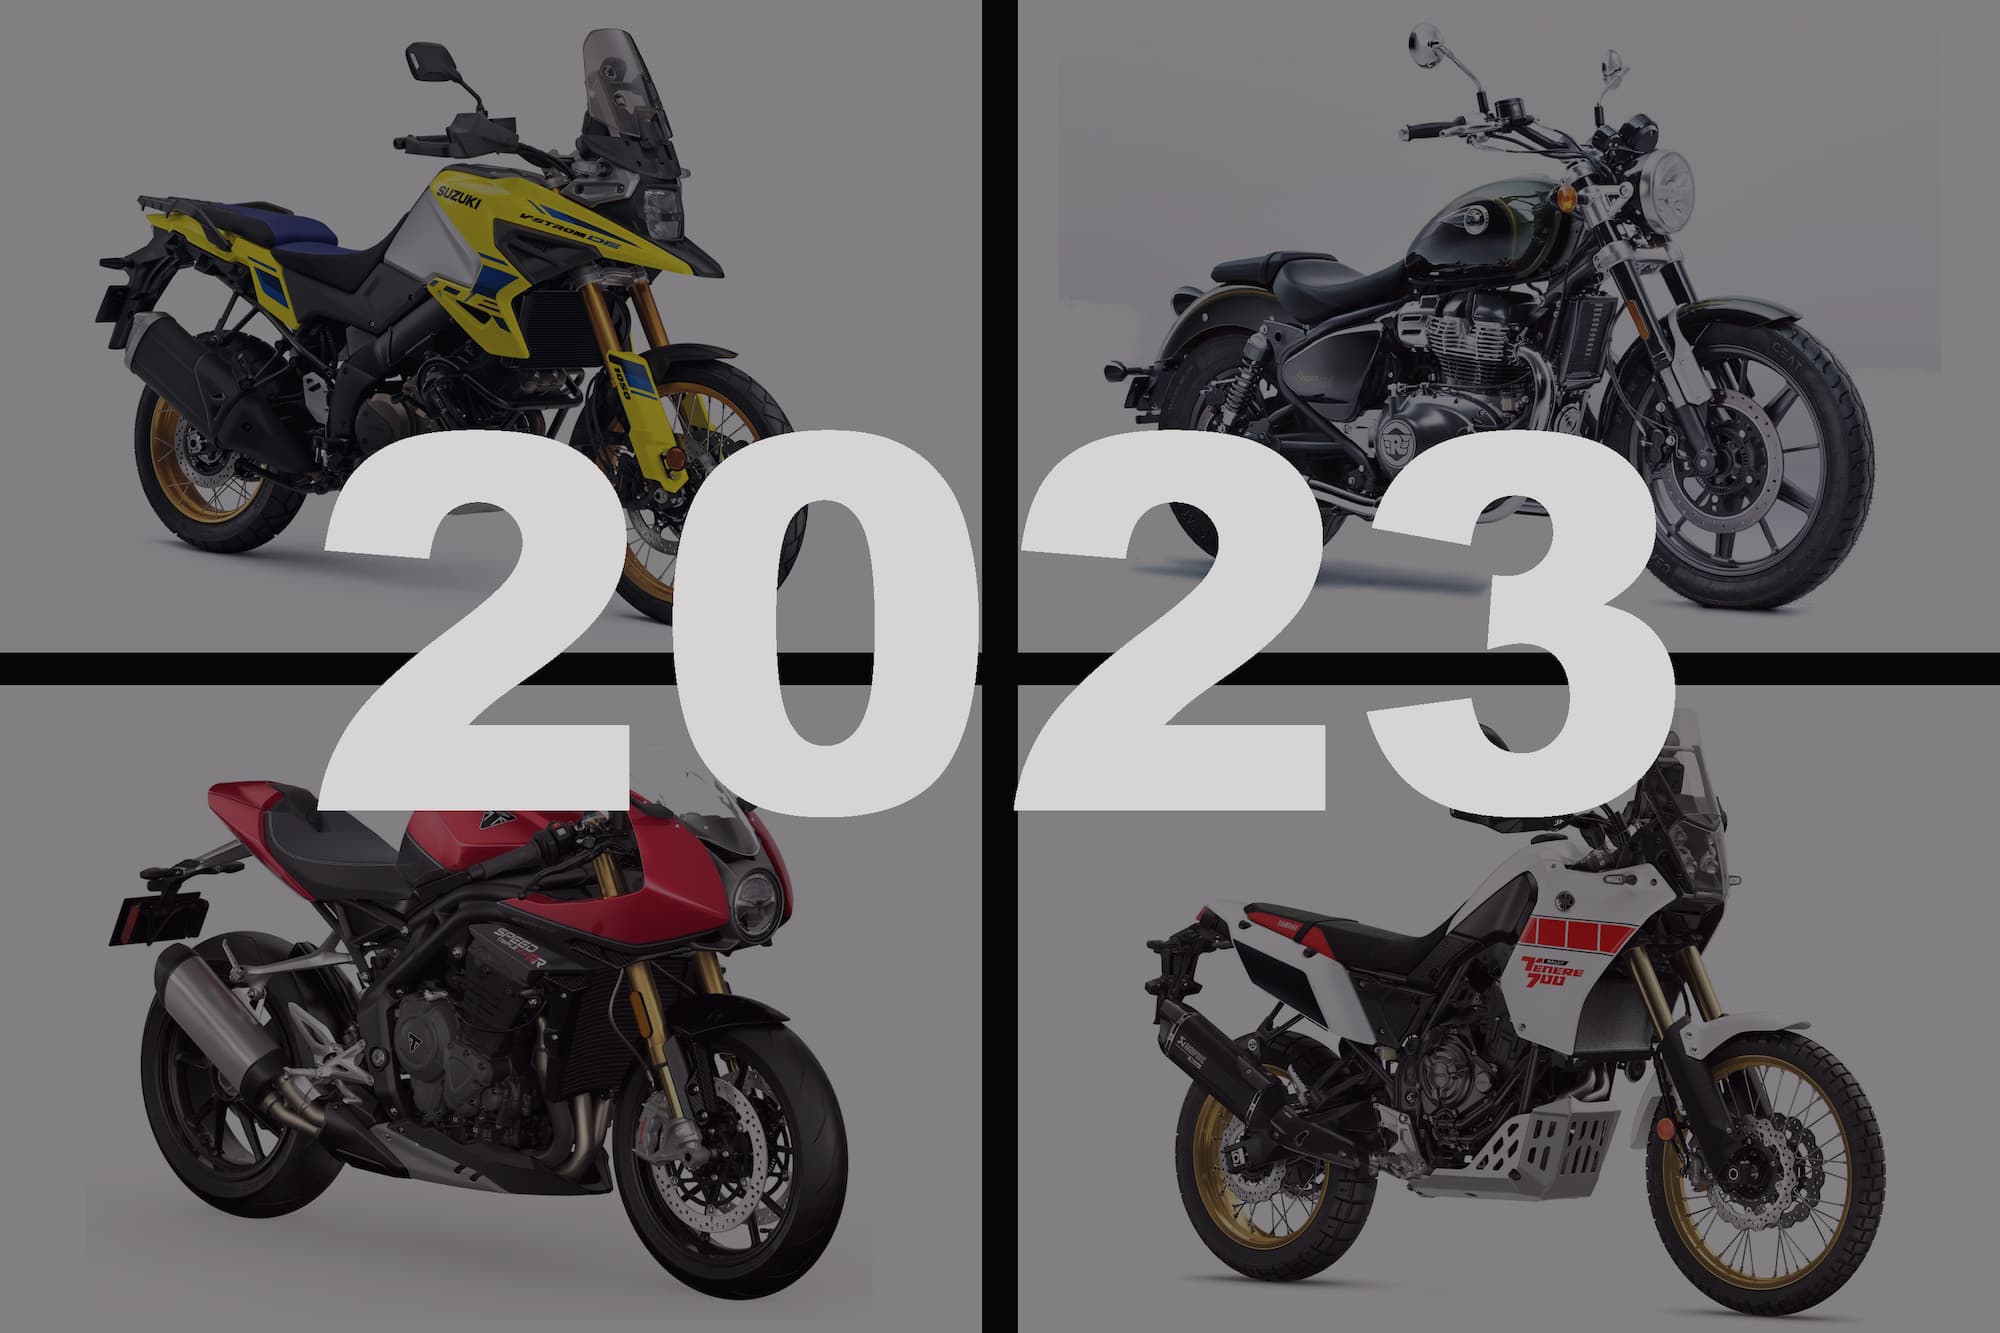 Revving Up and Hitting the Brakes: Motorcycle Trends of 2023